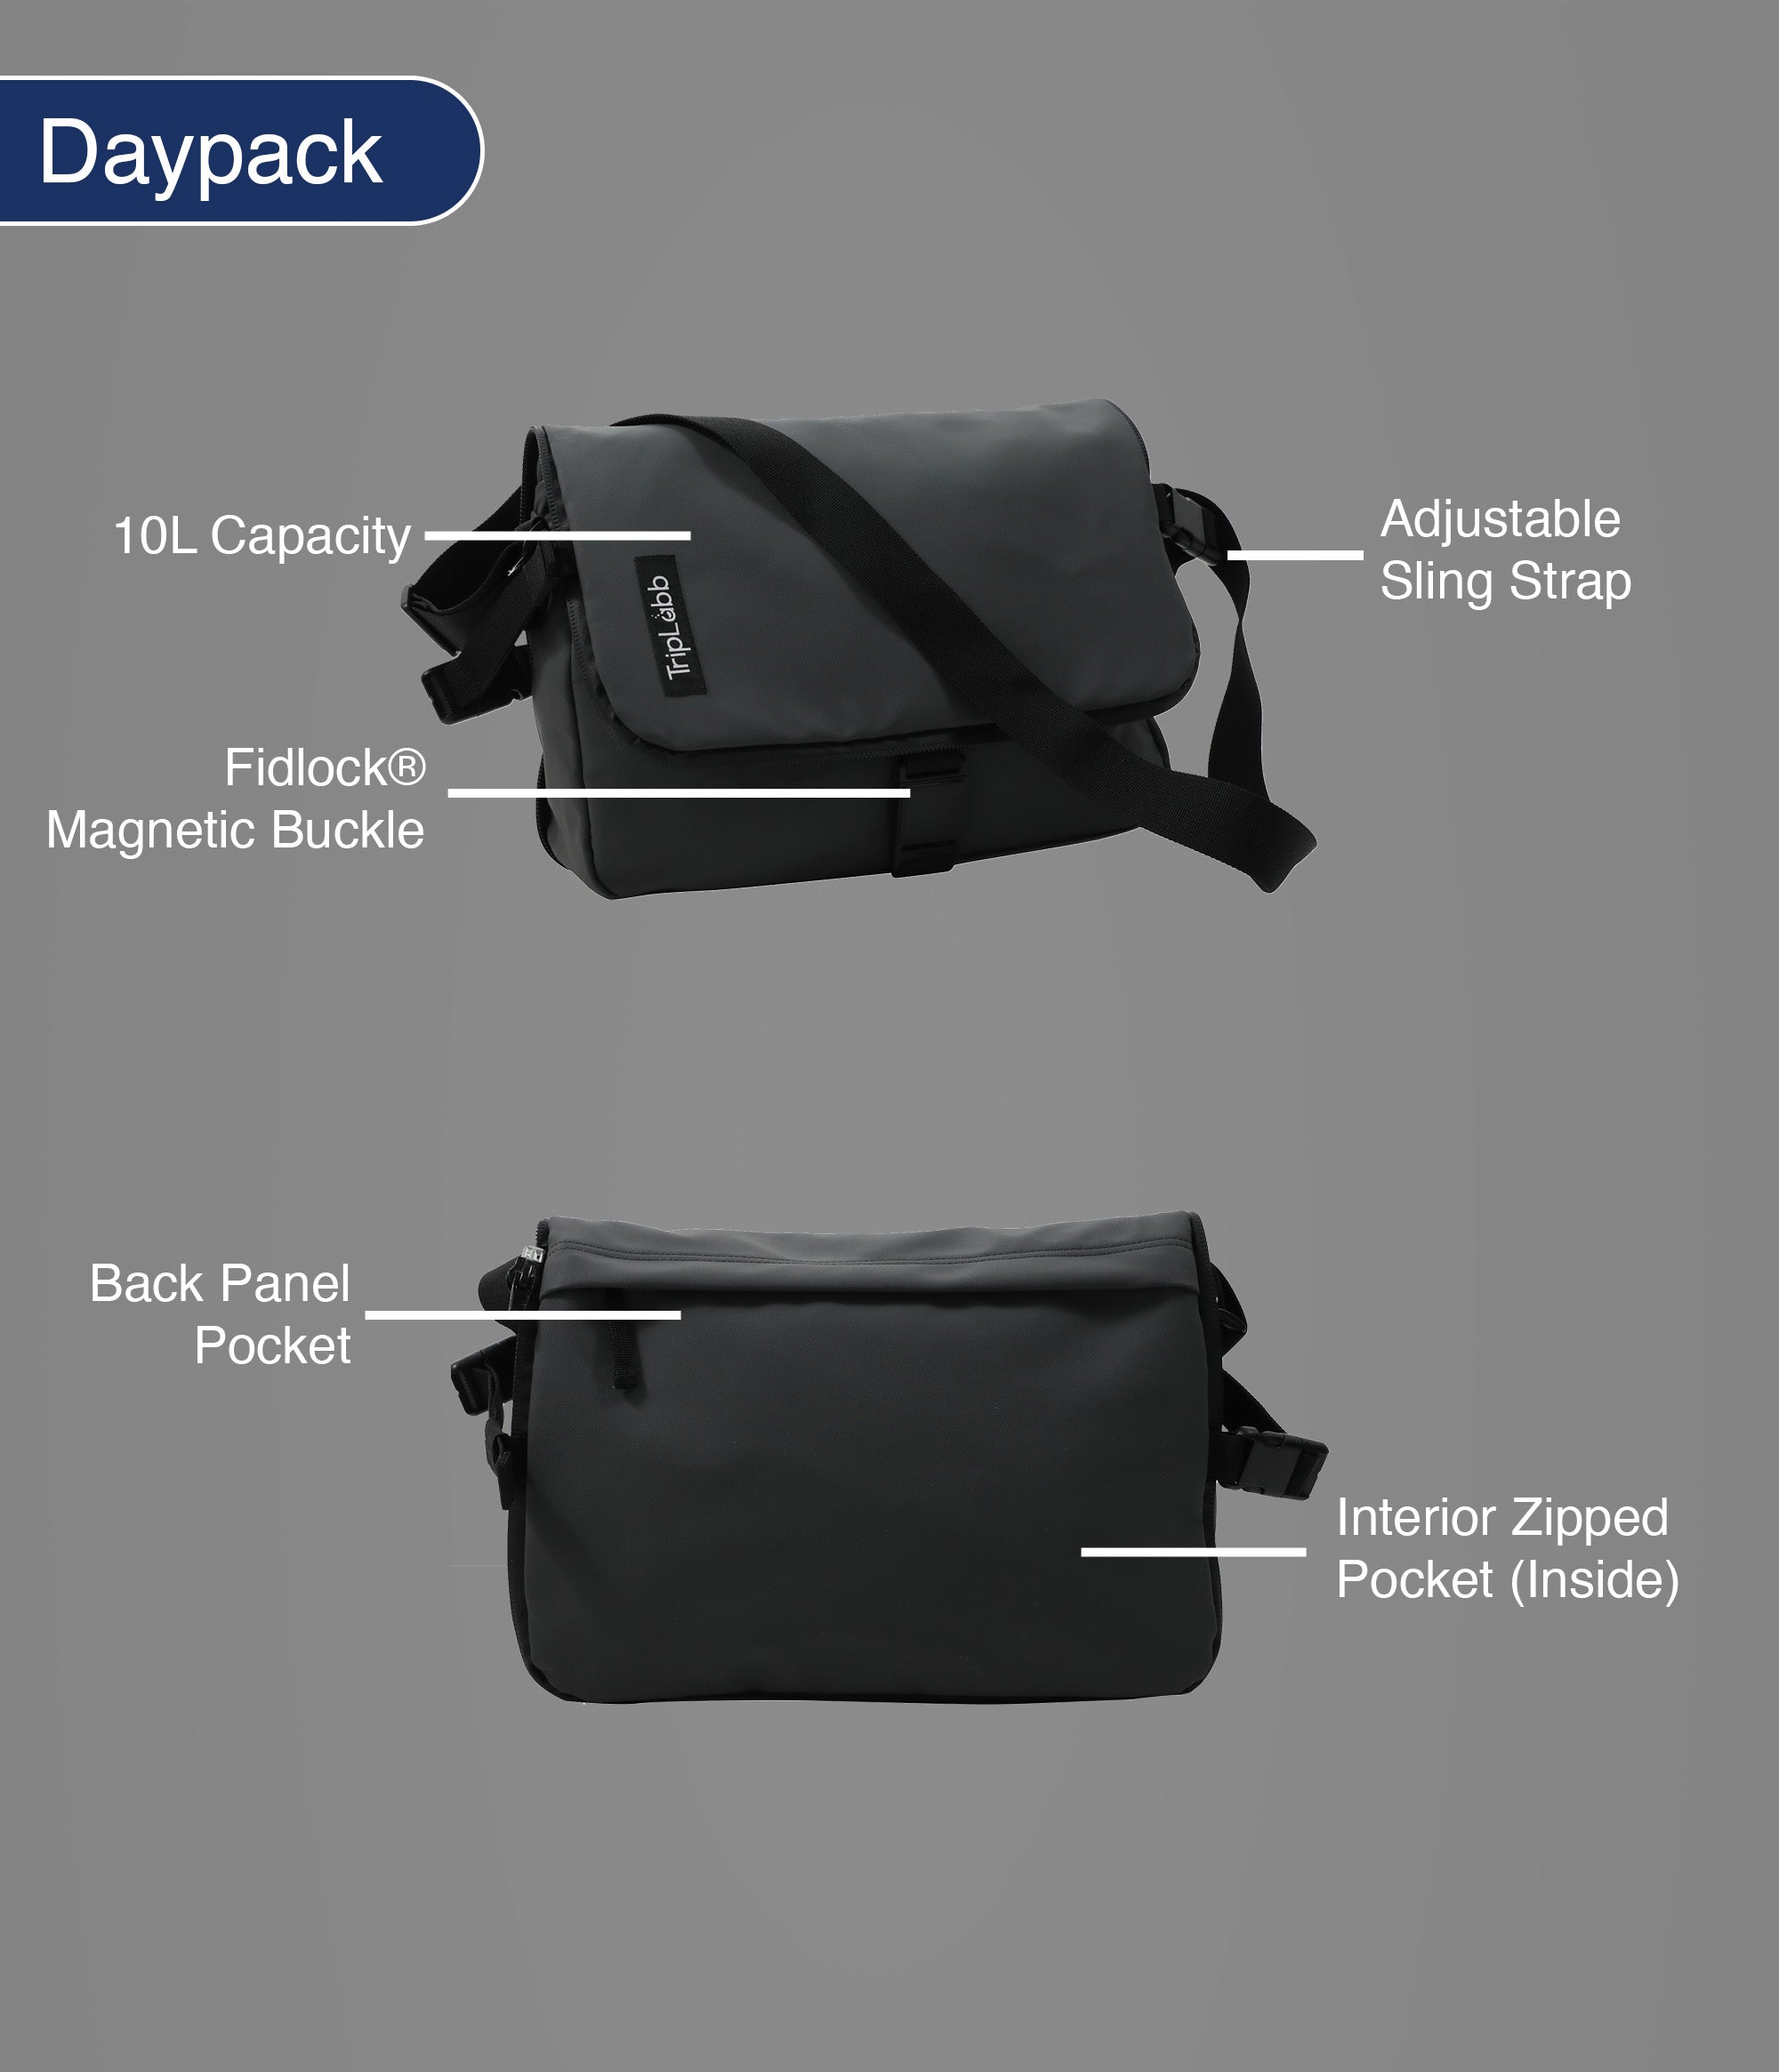 TripLabb 2-in-1 Carry-One Backpack | Indiegogo